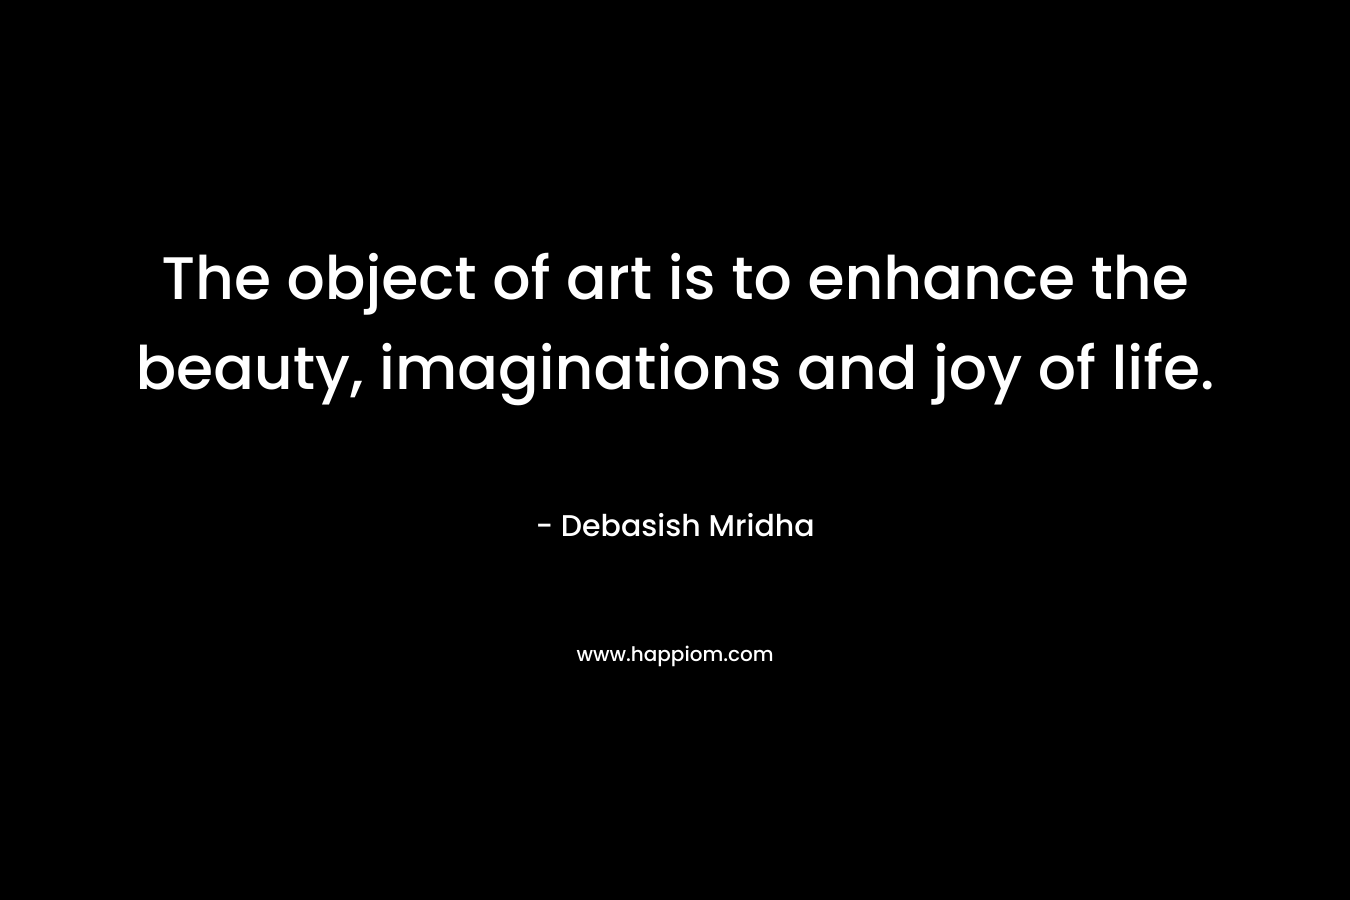 The object of art is to enhance the beauty, imaginations and joy of life.